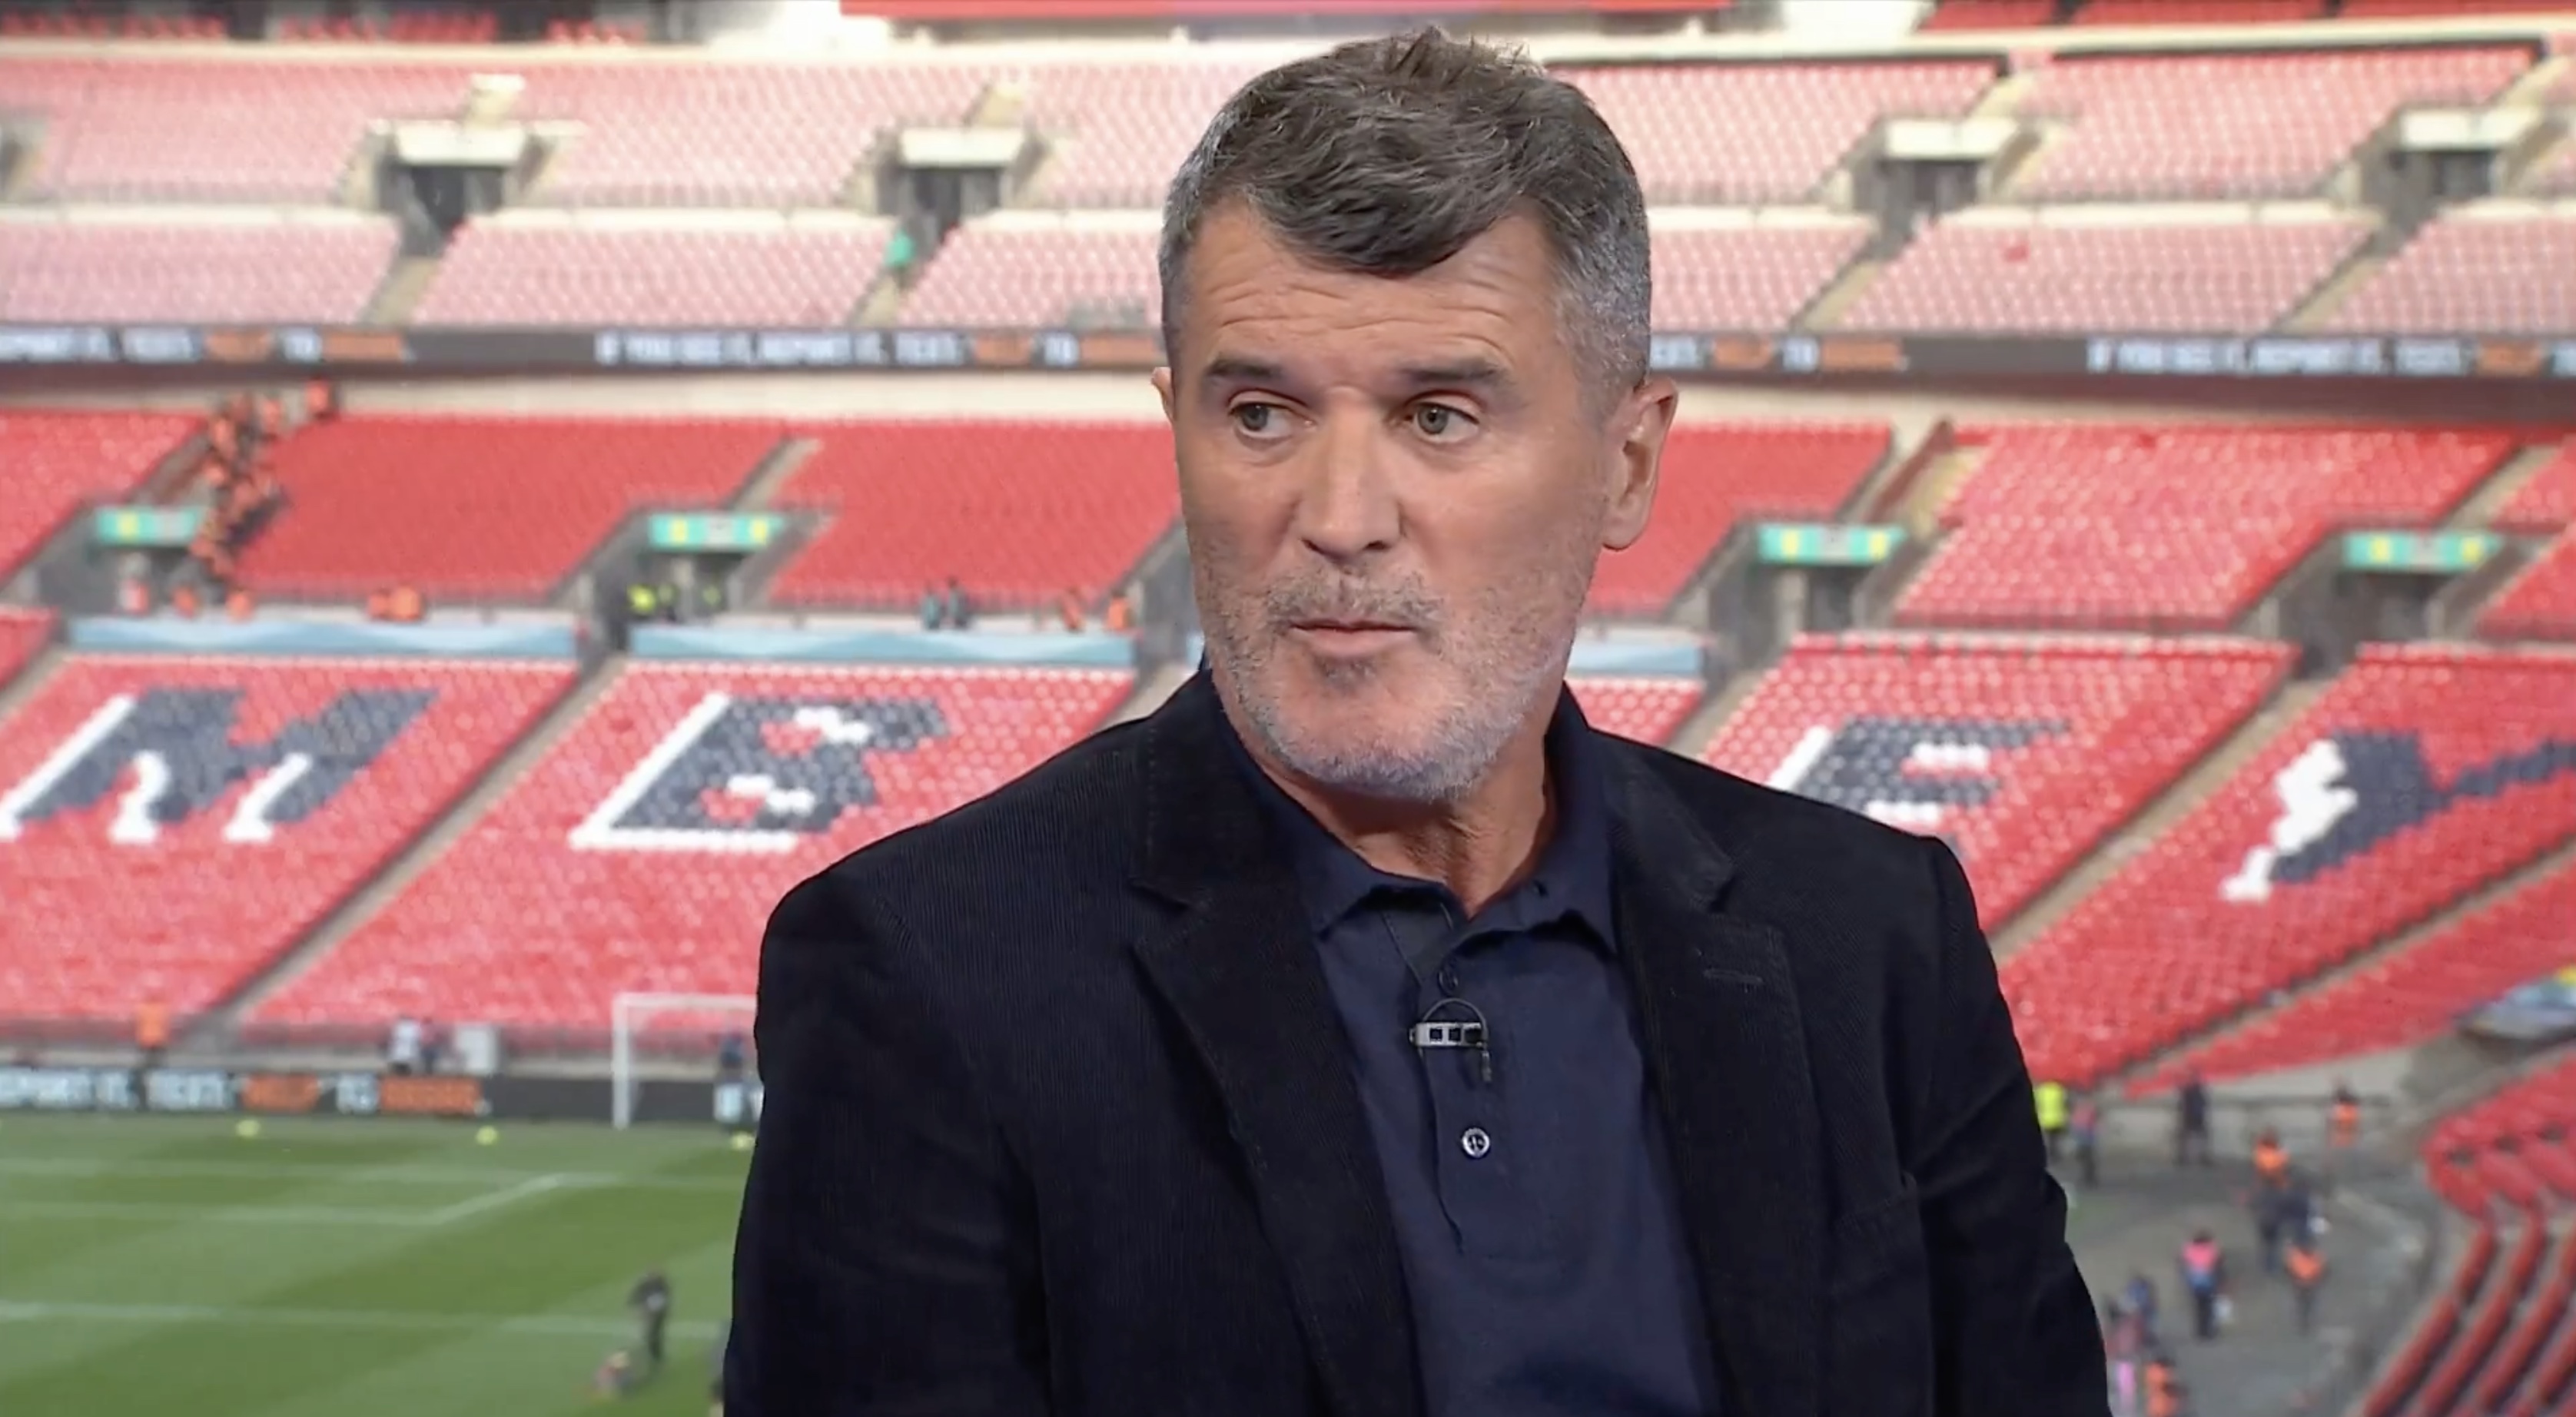 Roy Keane criticizes Manchester United star after Euro performance